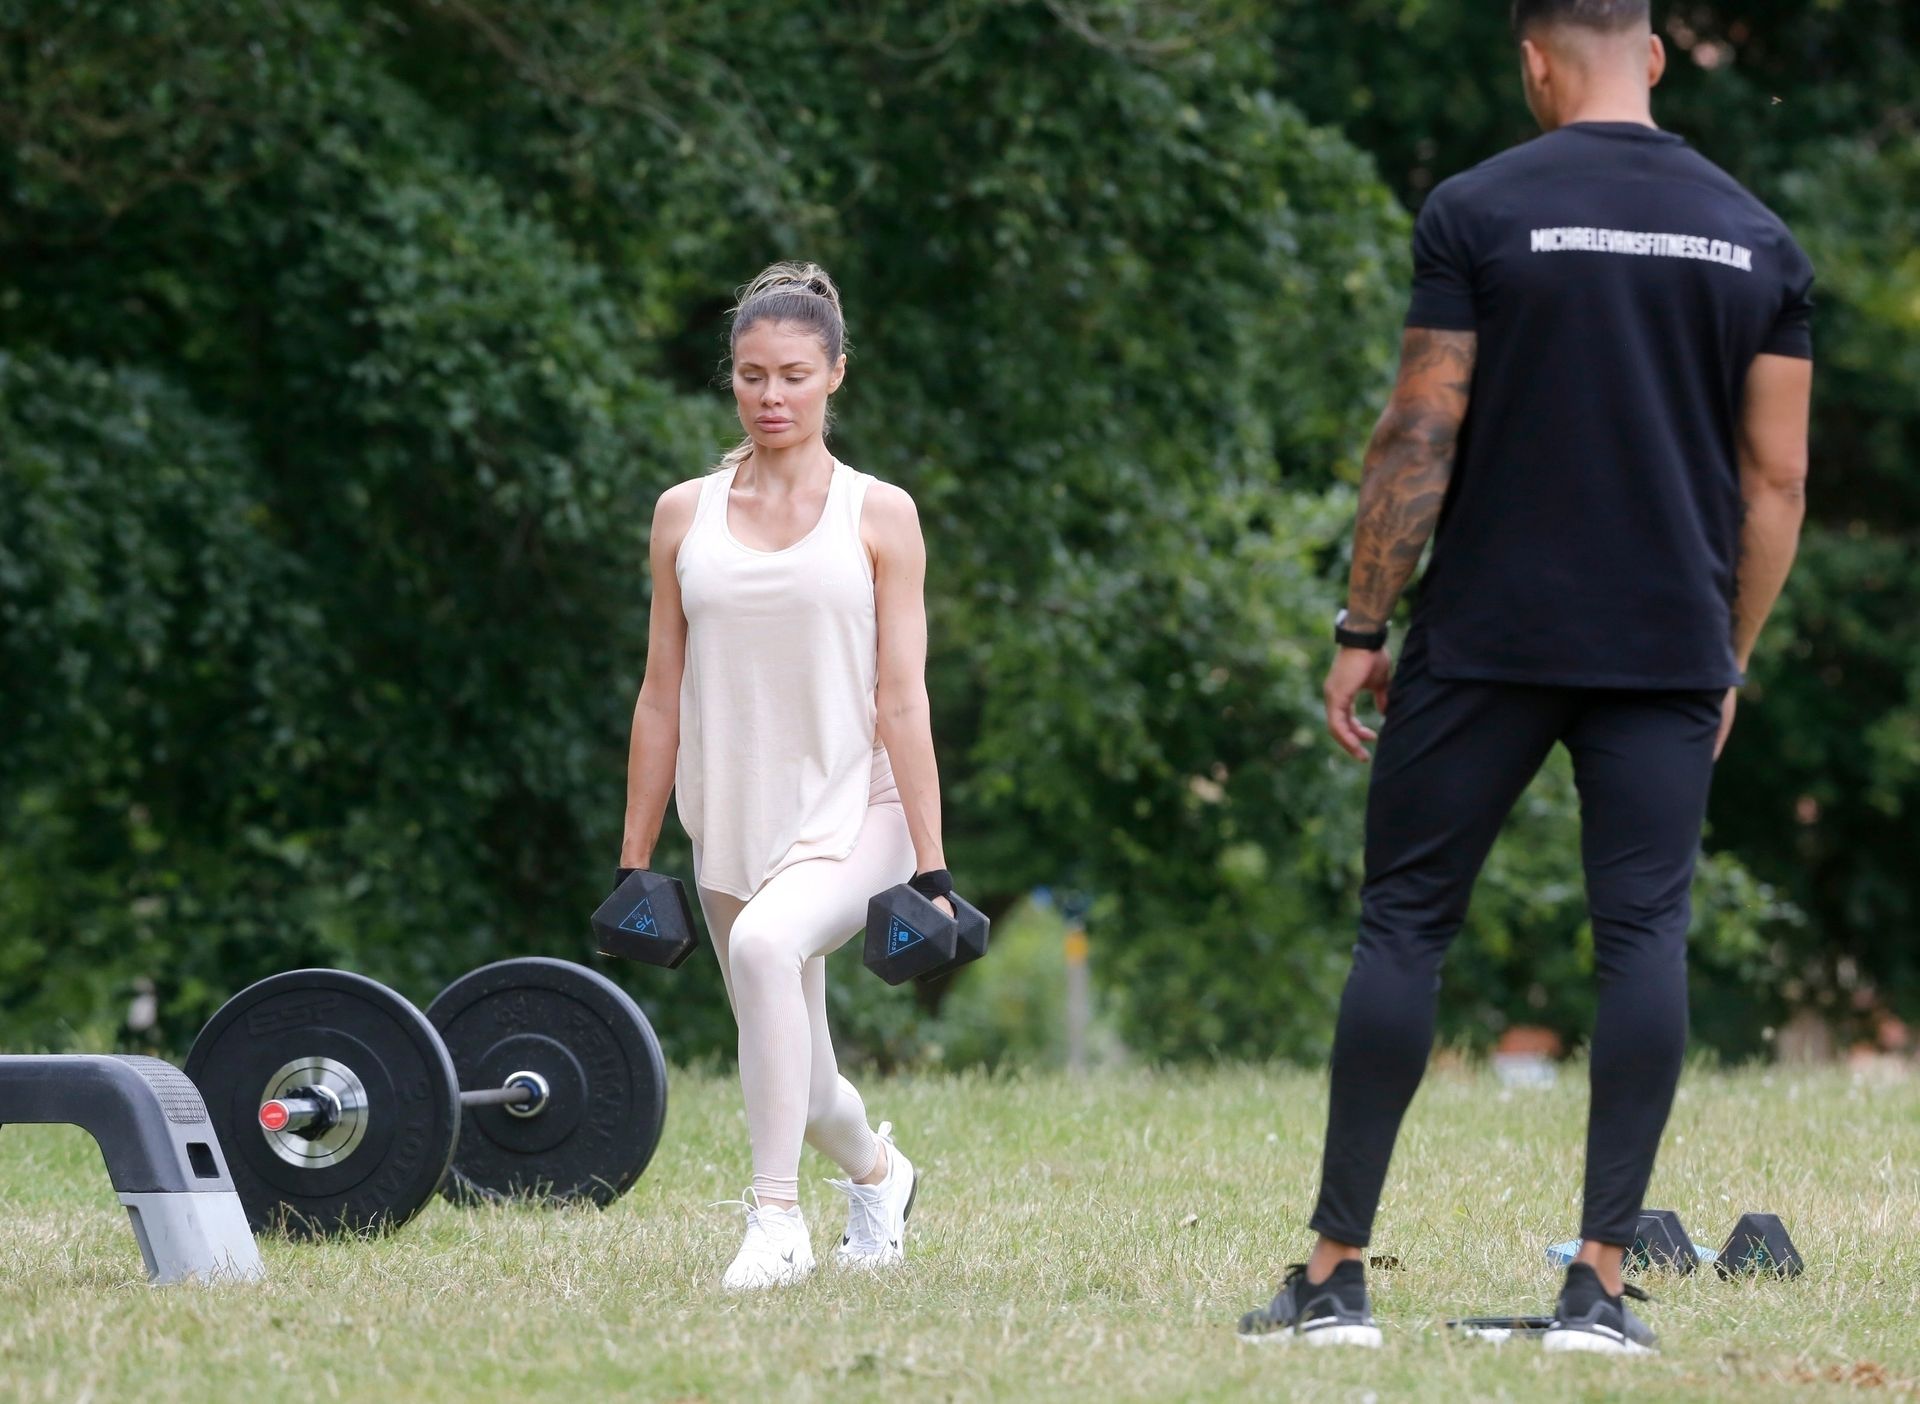 Busty Chloe Sims Works Out with Her Personal Trainer in a Park (31 Photos)